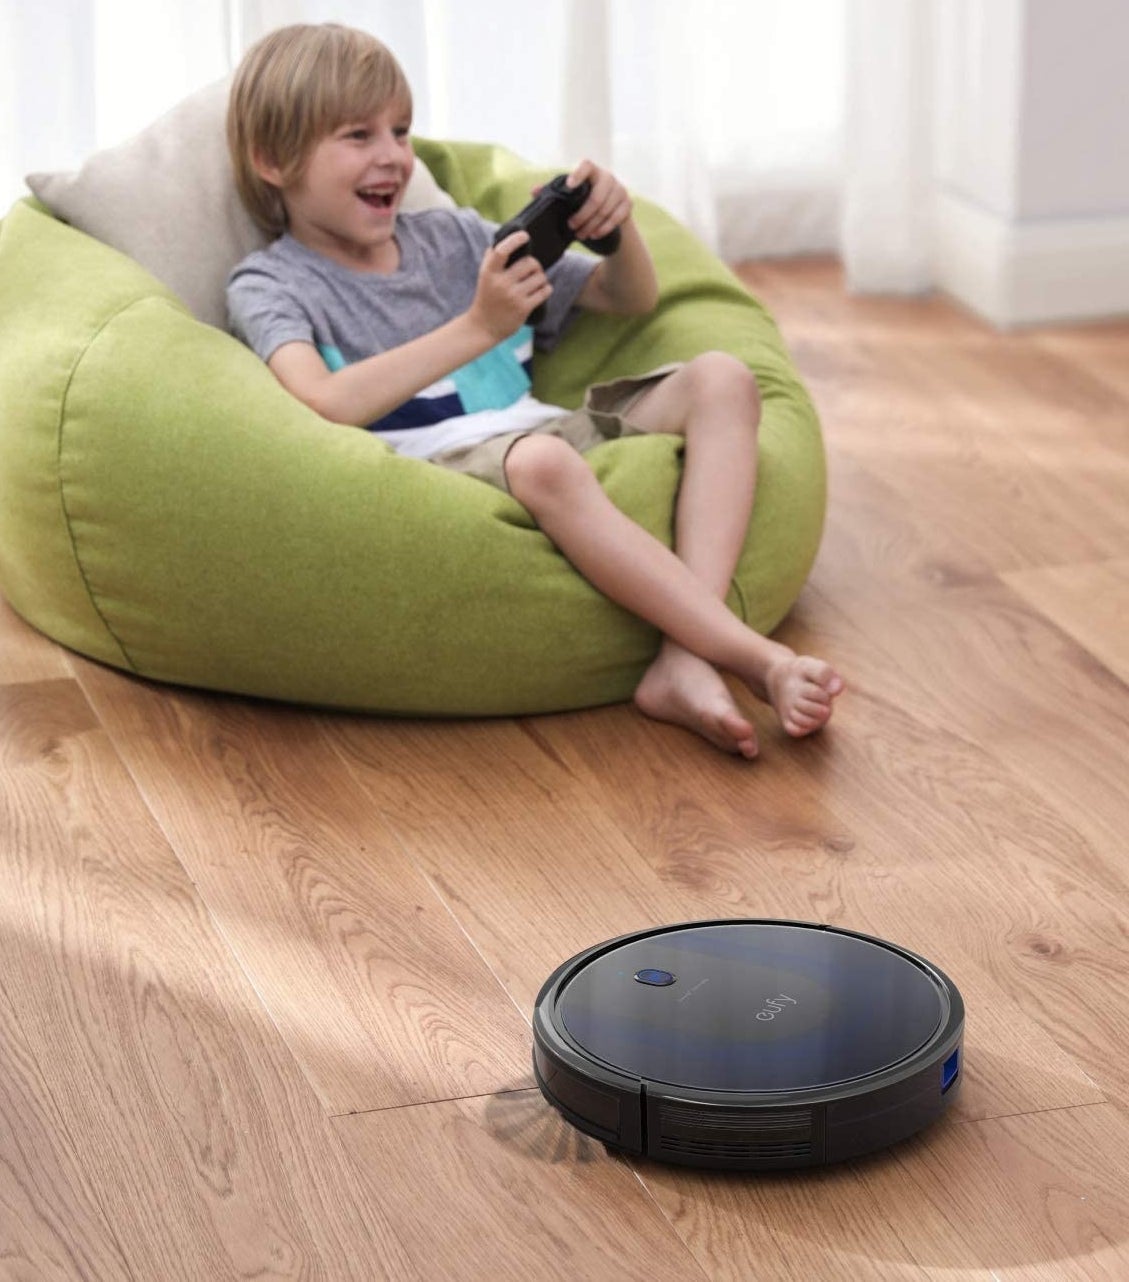 A child sitting in a bean bag chair with a robot vacuum cleaning the floor in front of them